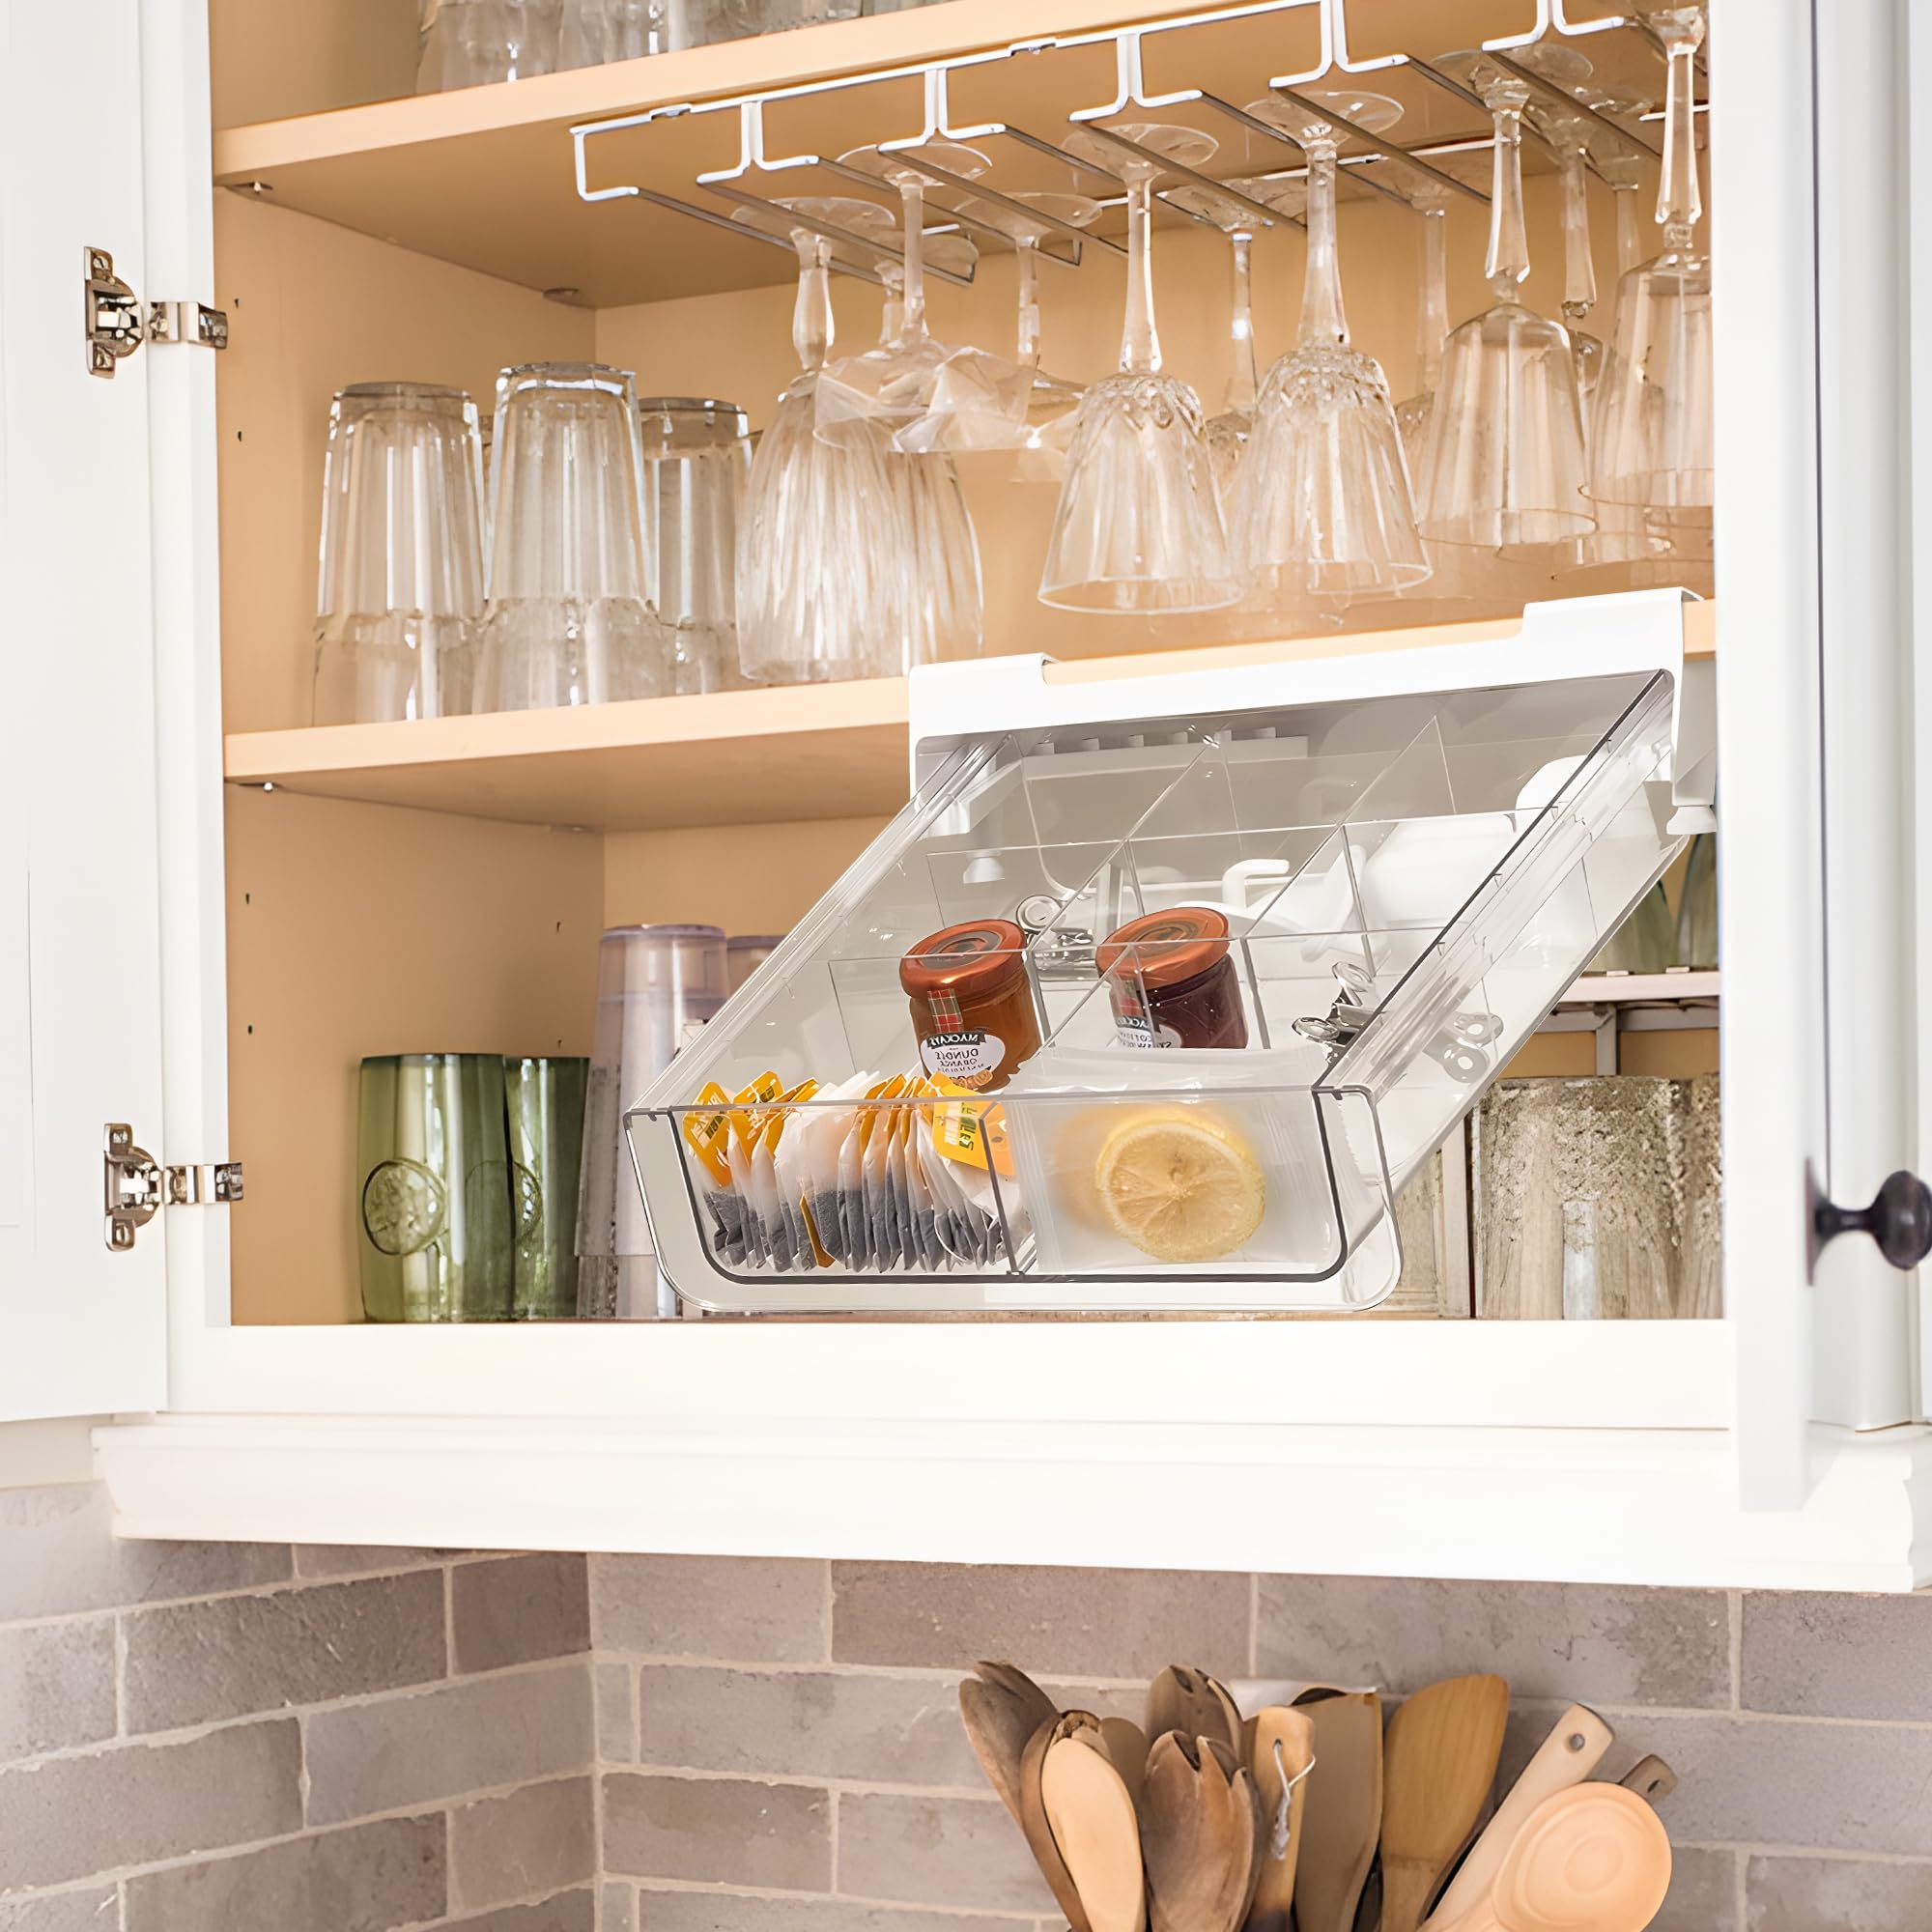 Pull Out Under the Shelf Drawer For Kitchen Cabinets | Easy To Install Cabinet Caddy Tea Coffee Cookware Organizer | Convert Your Pantry Shelf With Drawers Adding Storage Space To Your Cupboard.